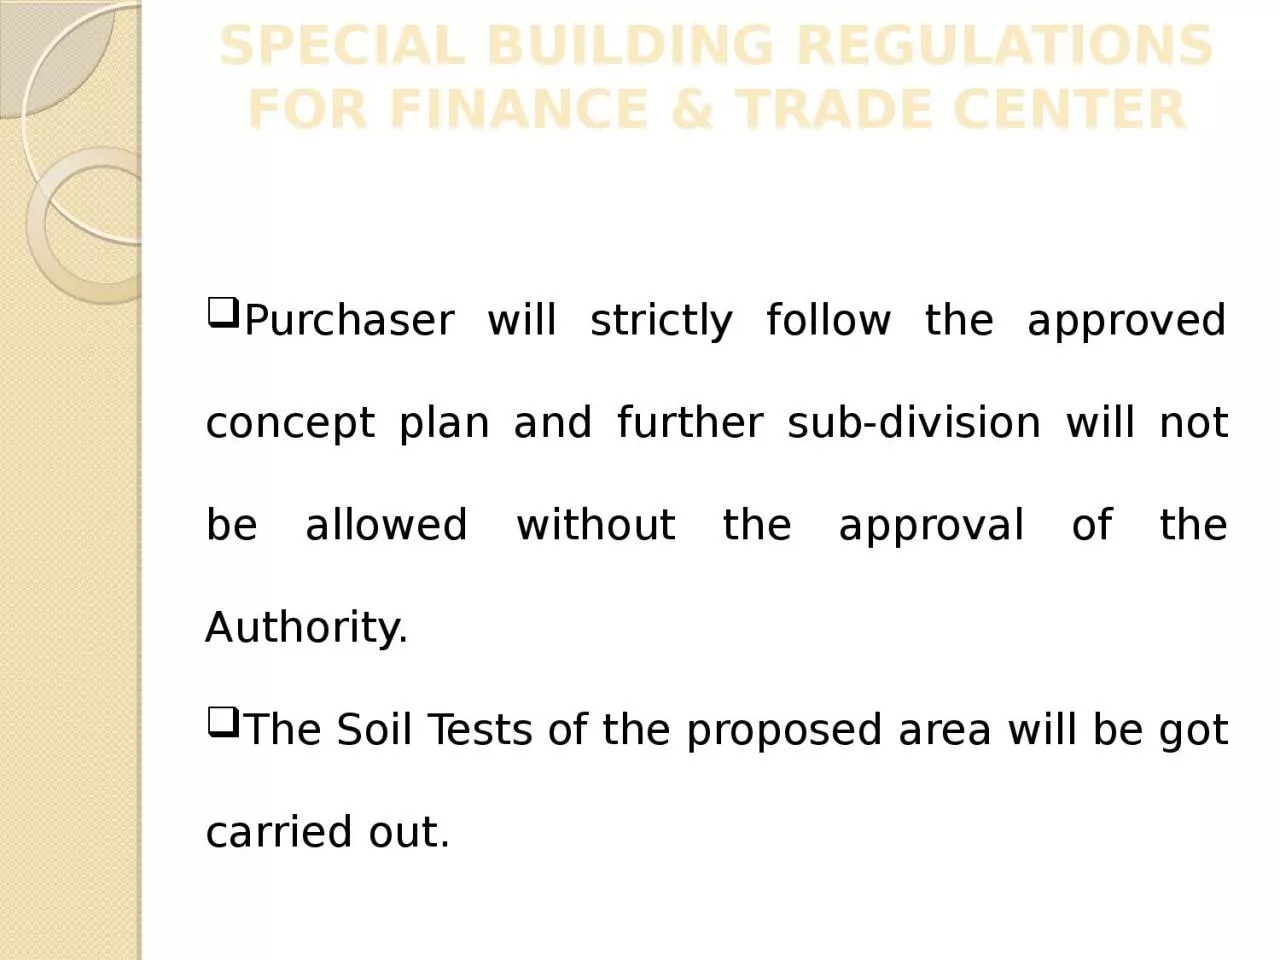 Purchaser will strictly follow the approved concept plan and further sub-division will